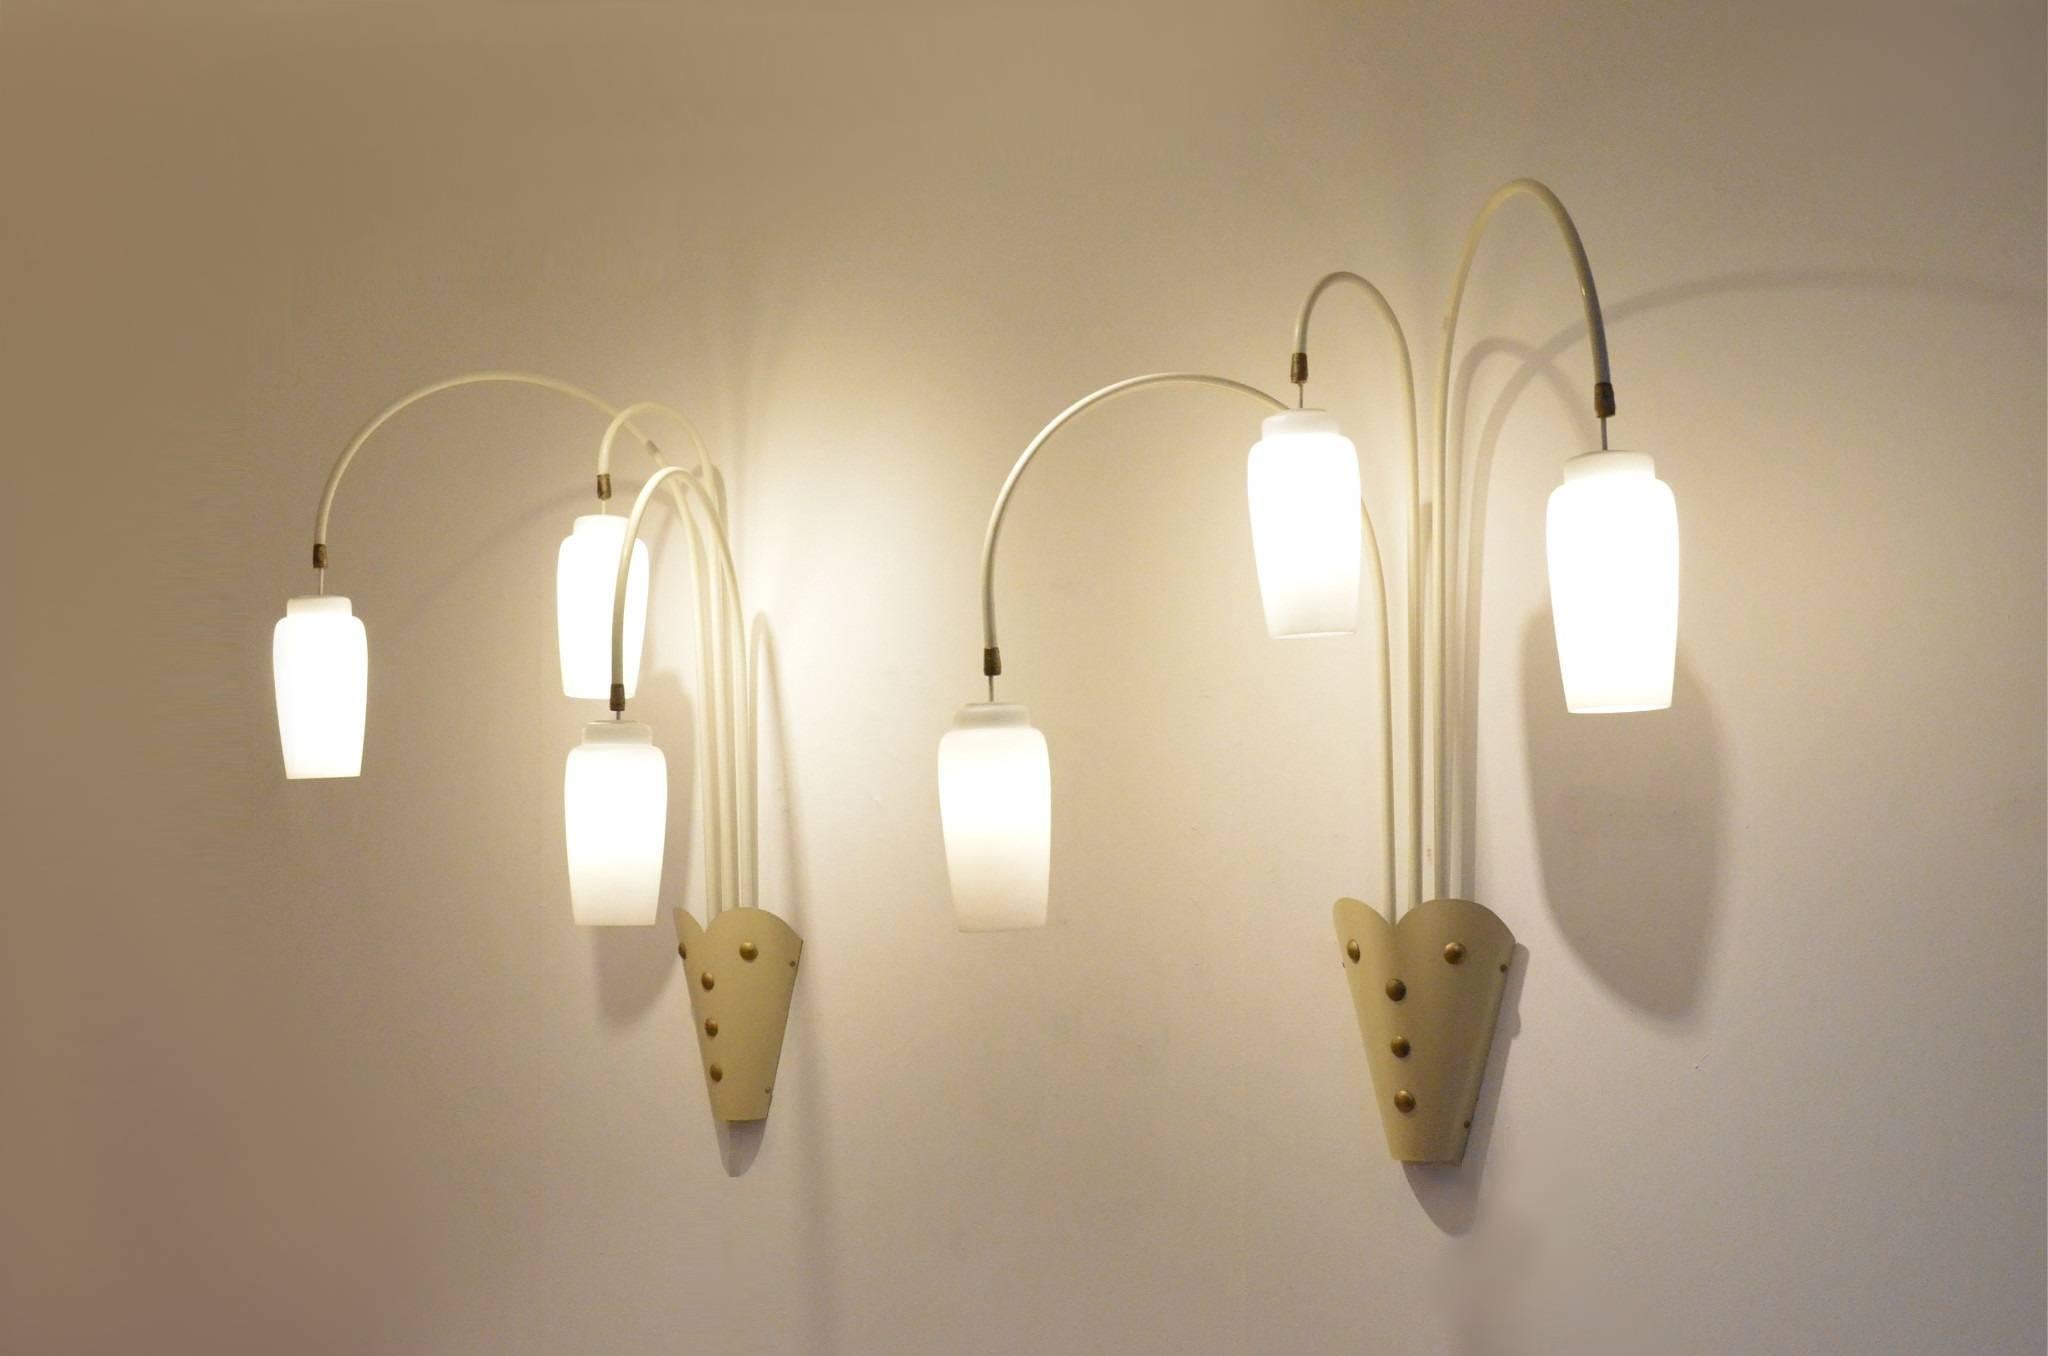 2x XL sized wall sconces originating from a Theater in France, the light have been custom-made for the place.
Each sconce is composed of three stems ending up with a suspended opalescent glass diffuser. The stems are covered with cream color coated